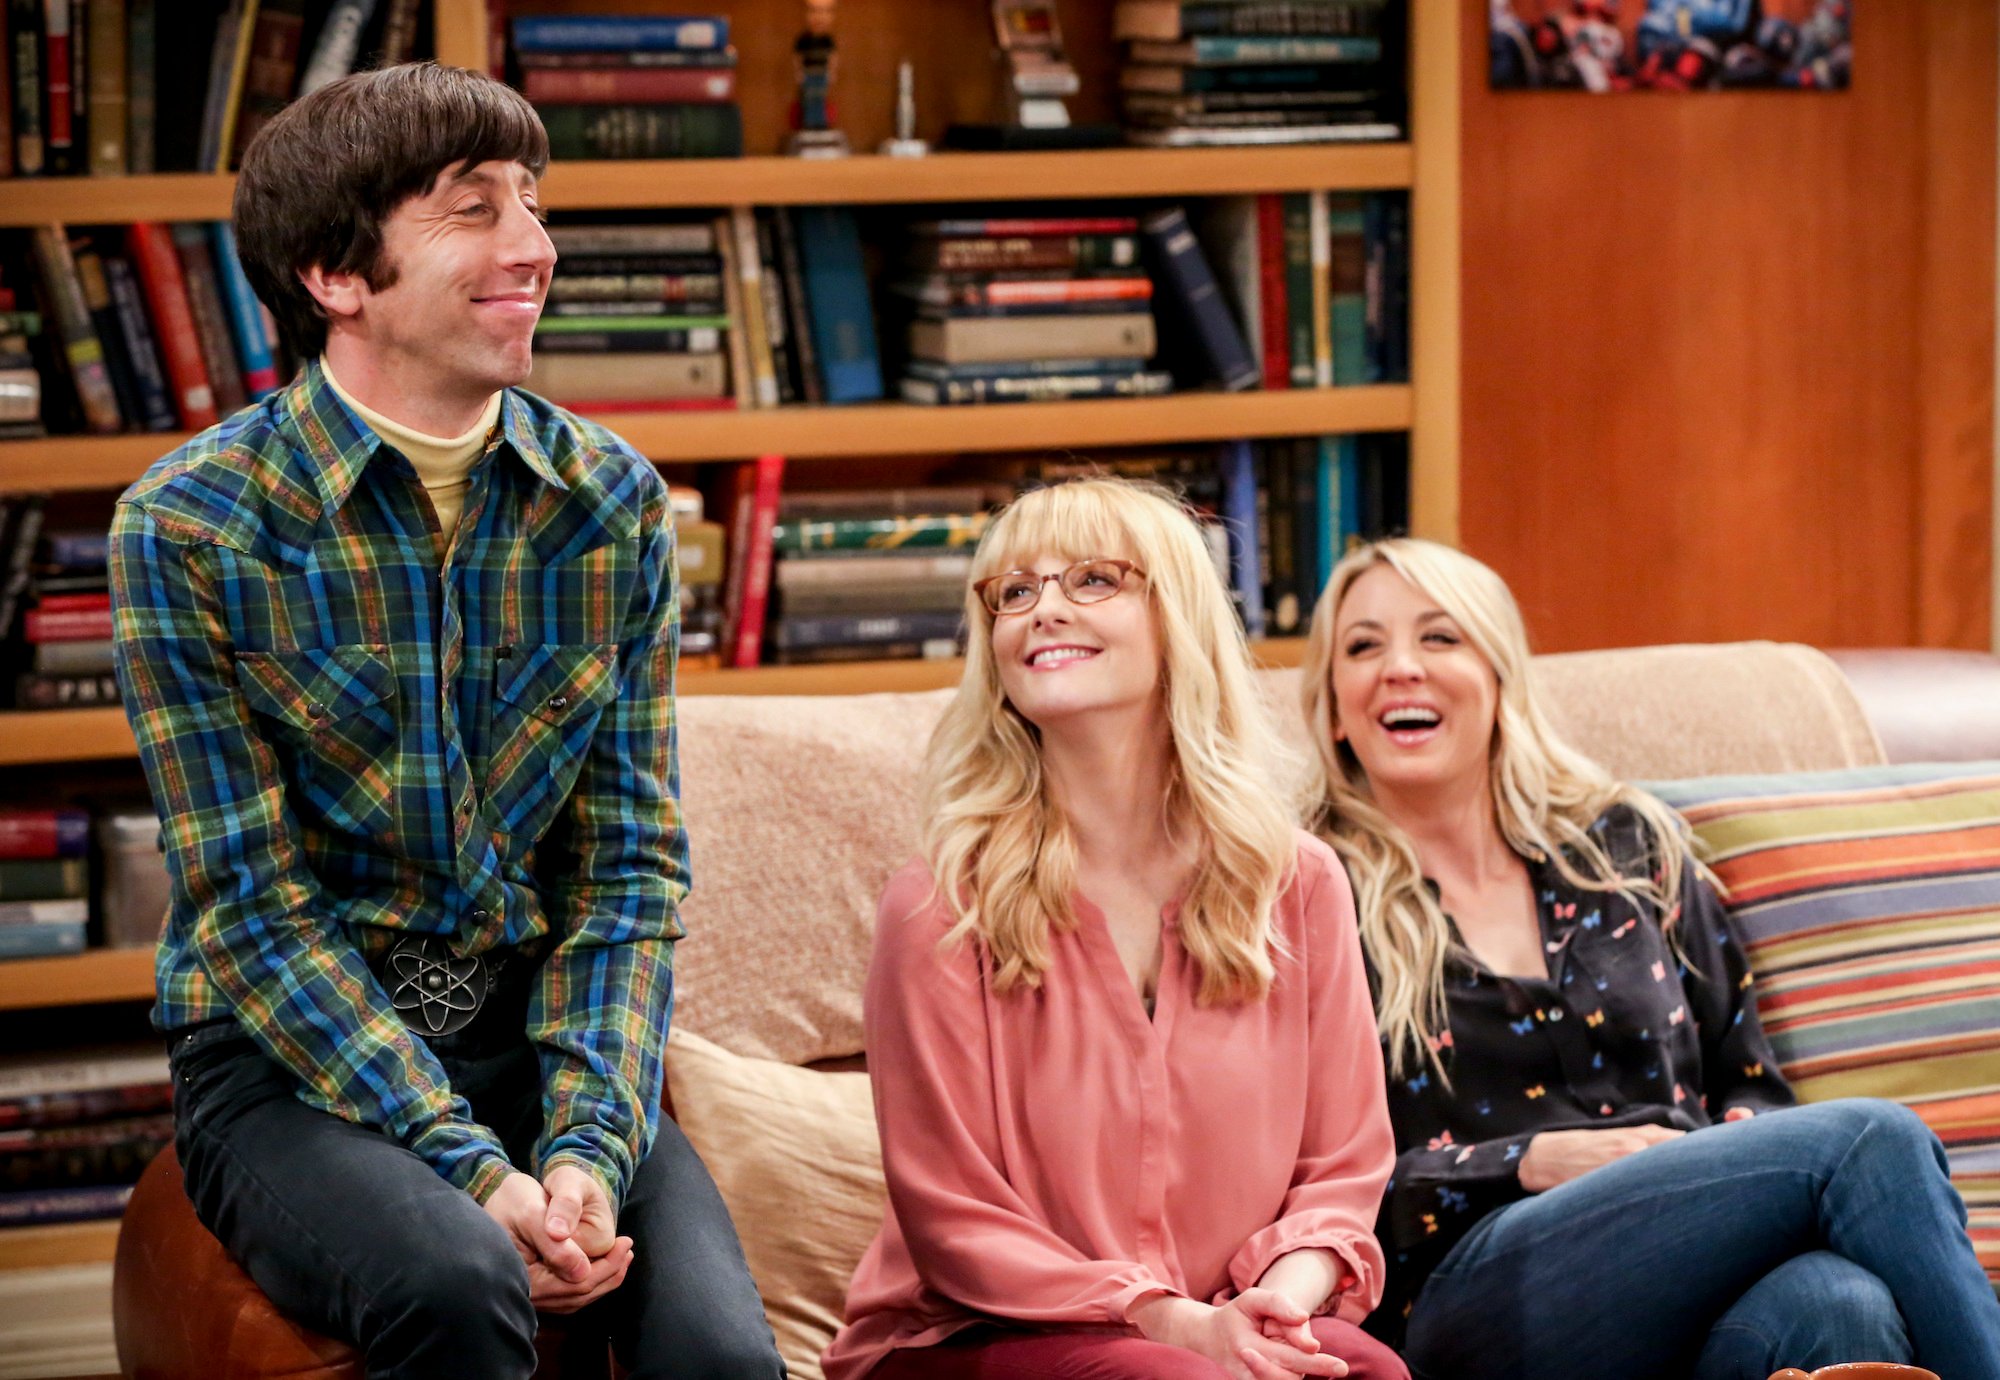 Big Bang Theory: Howard, Bernadette and Penny sit on the couch